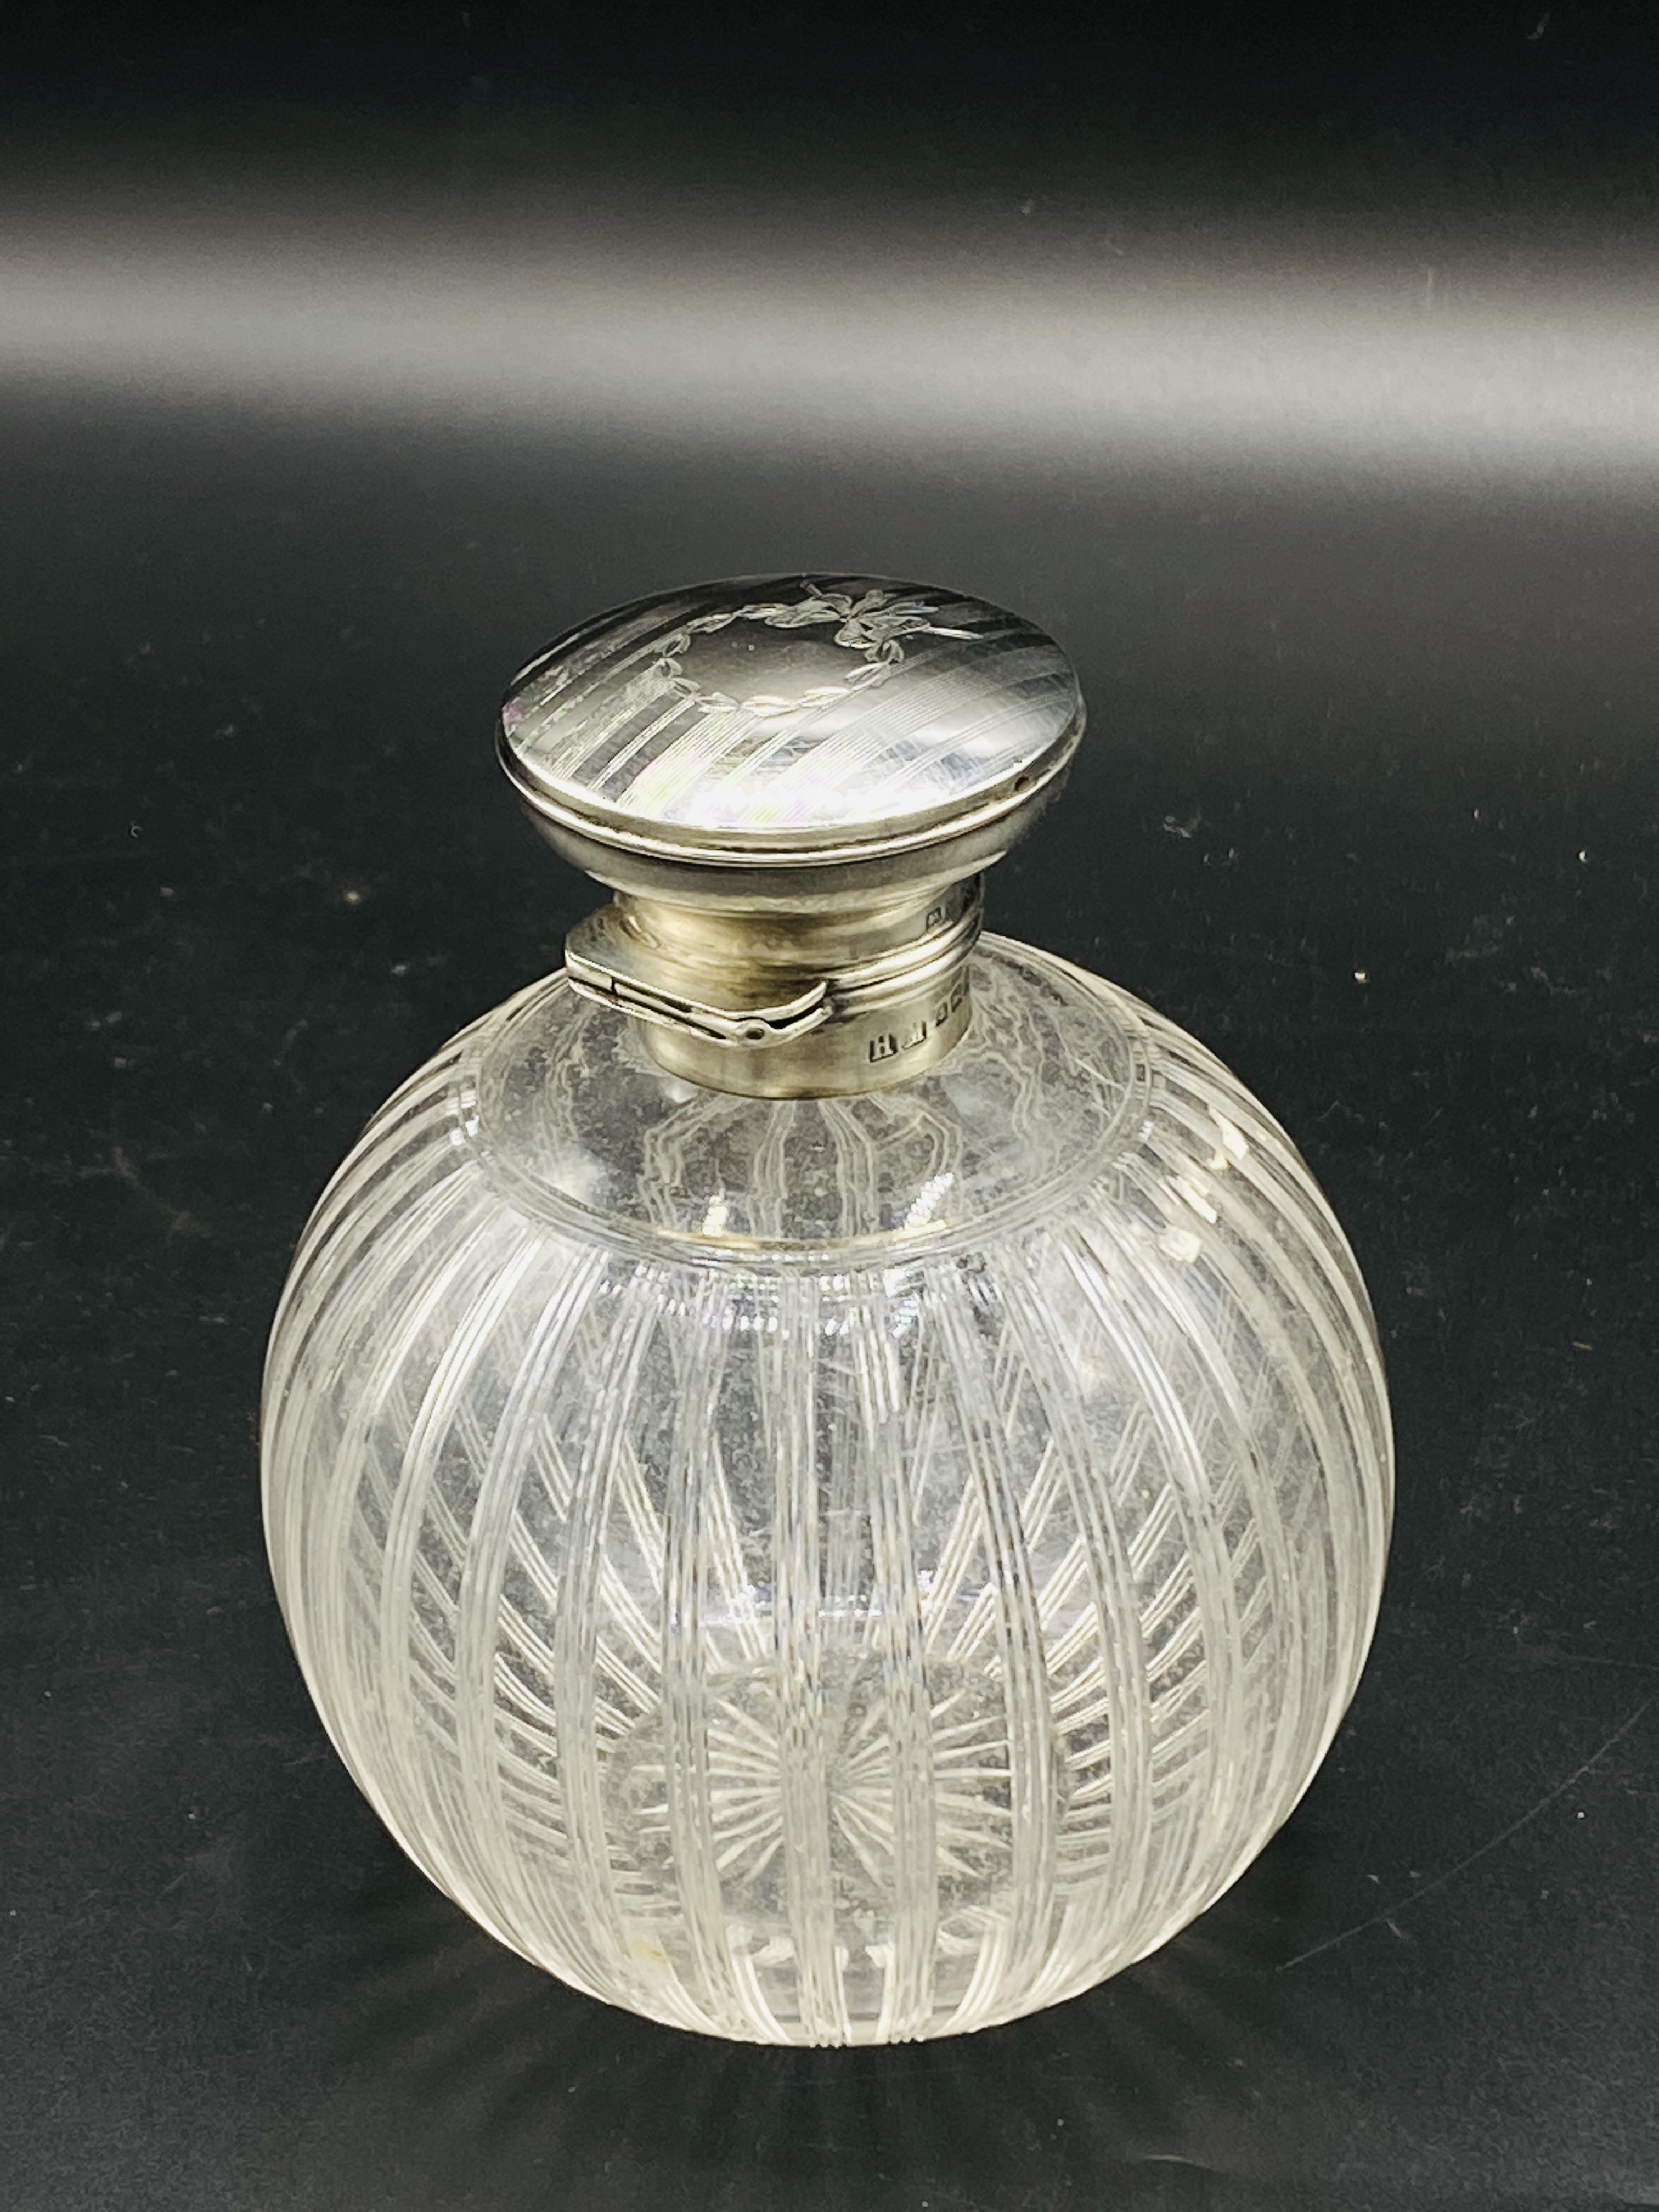 Early 20th century cut glass toilet water bottle with silver top - Image 2 of 4